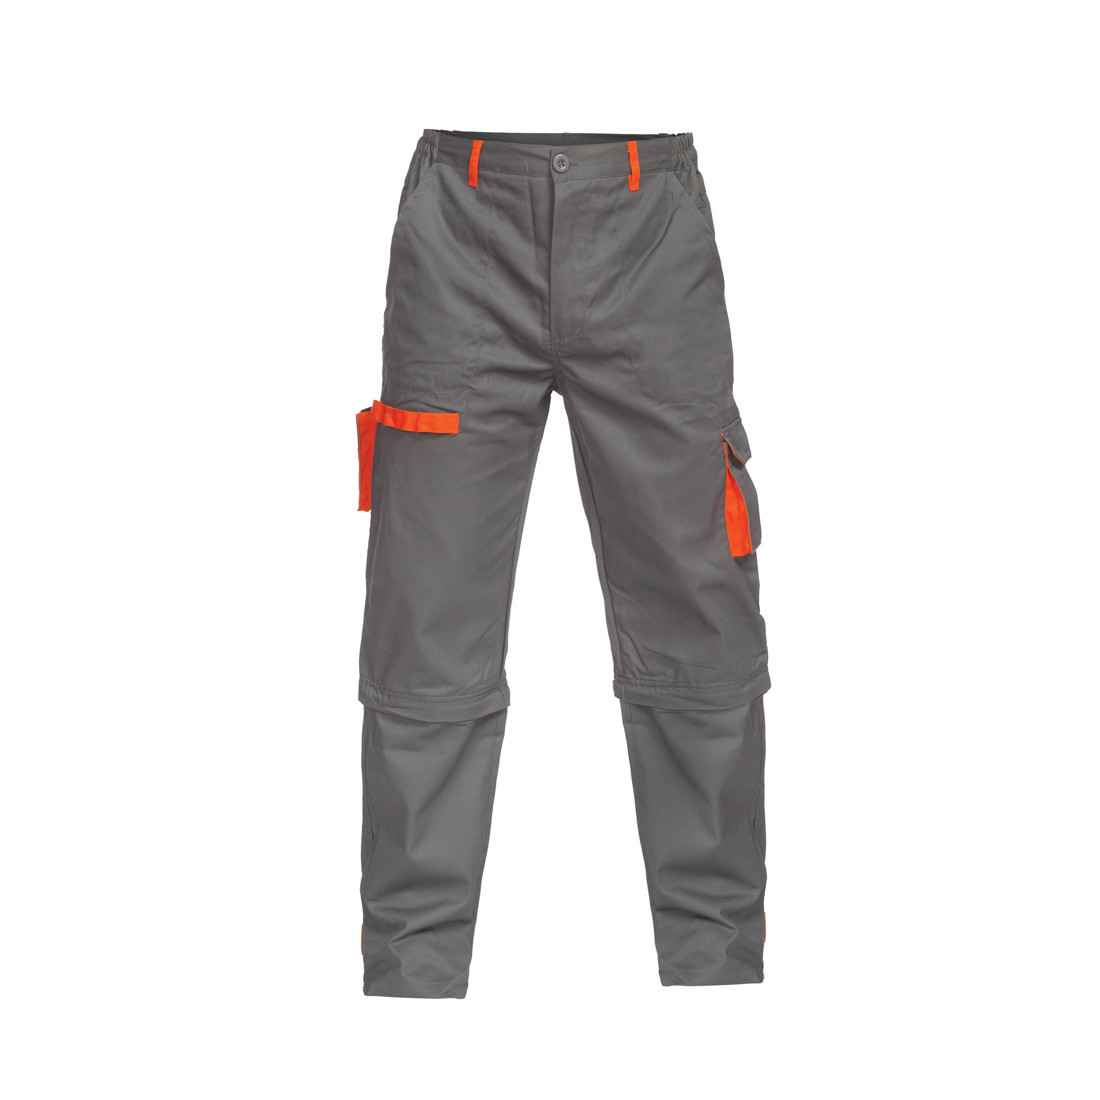 SIGMA Trousers - Safetywear